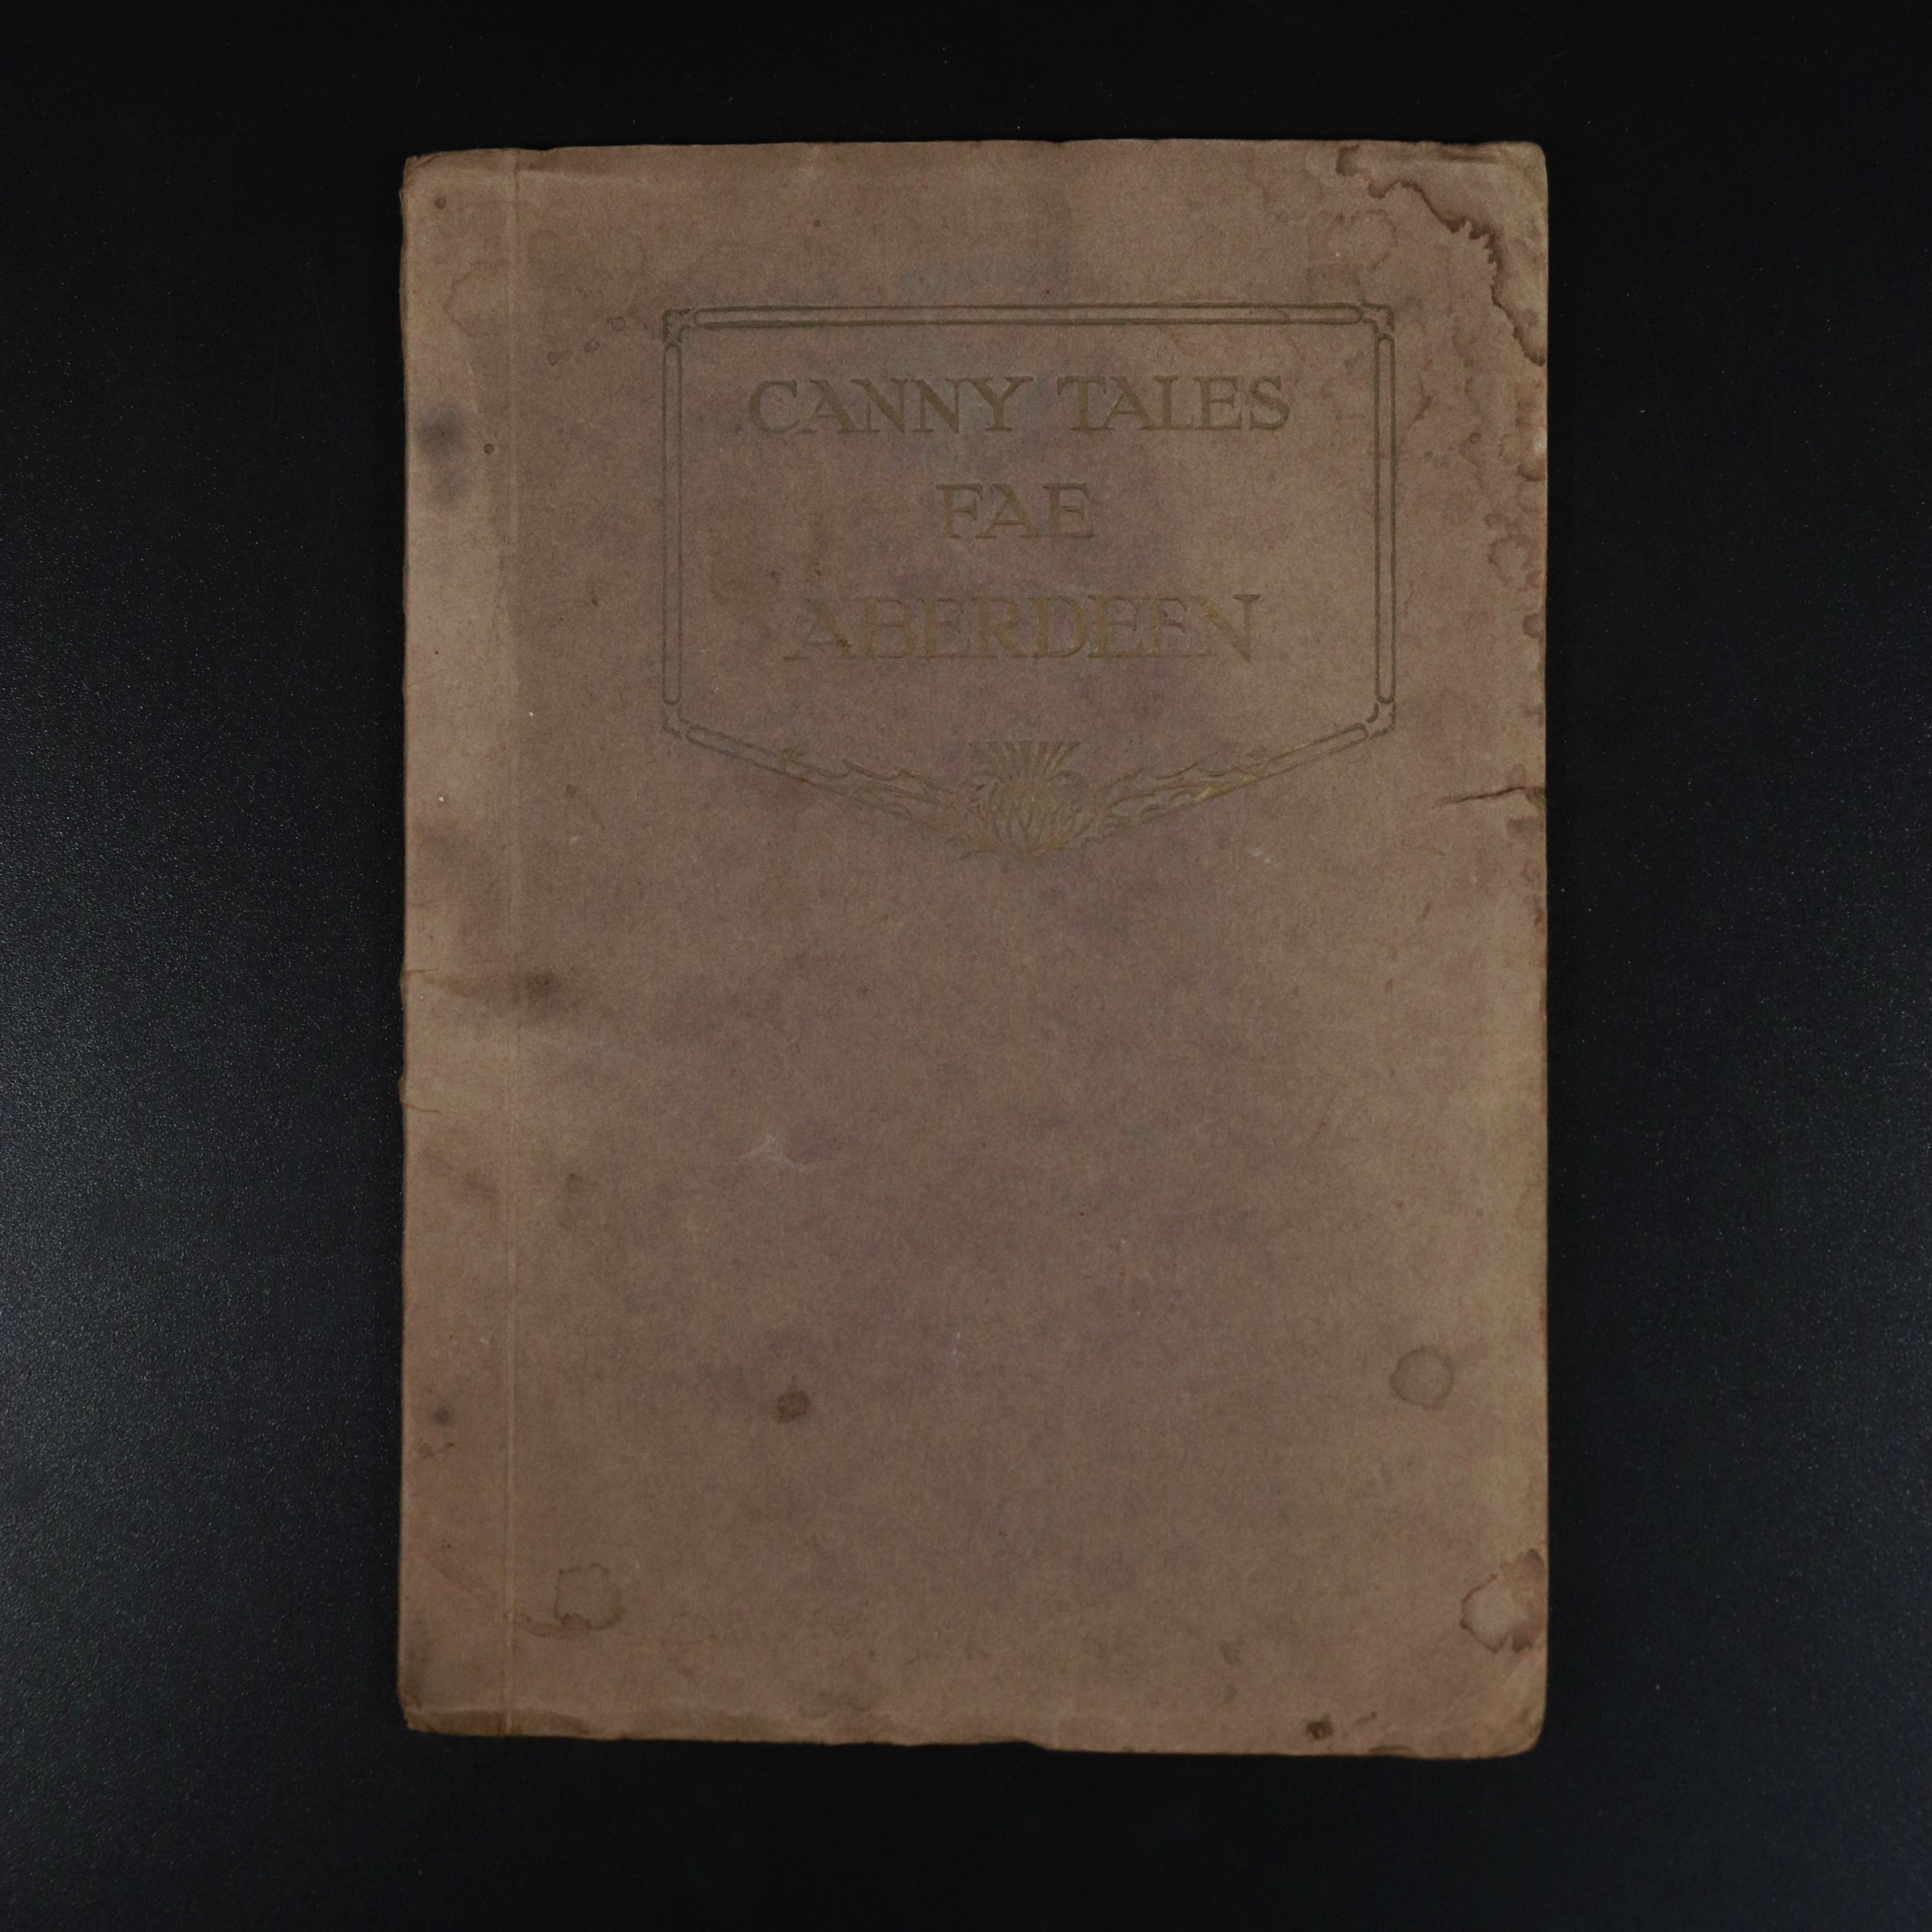 1926 Canny Tales Fae Aberdeen by Allan Junior Antique Scottish Fiction Book